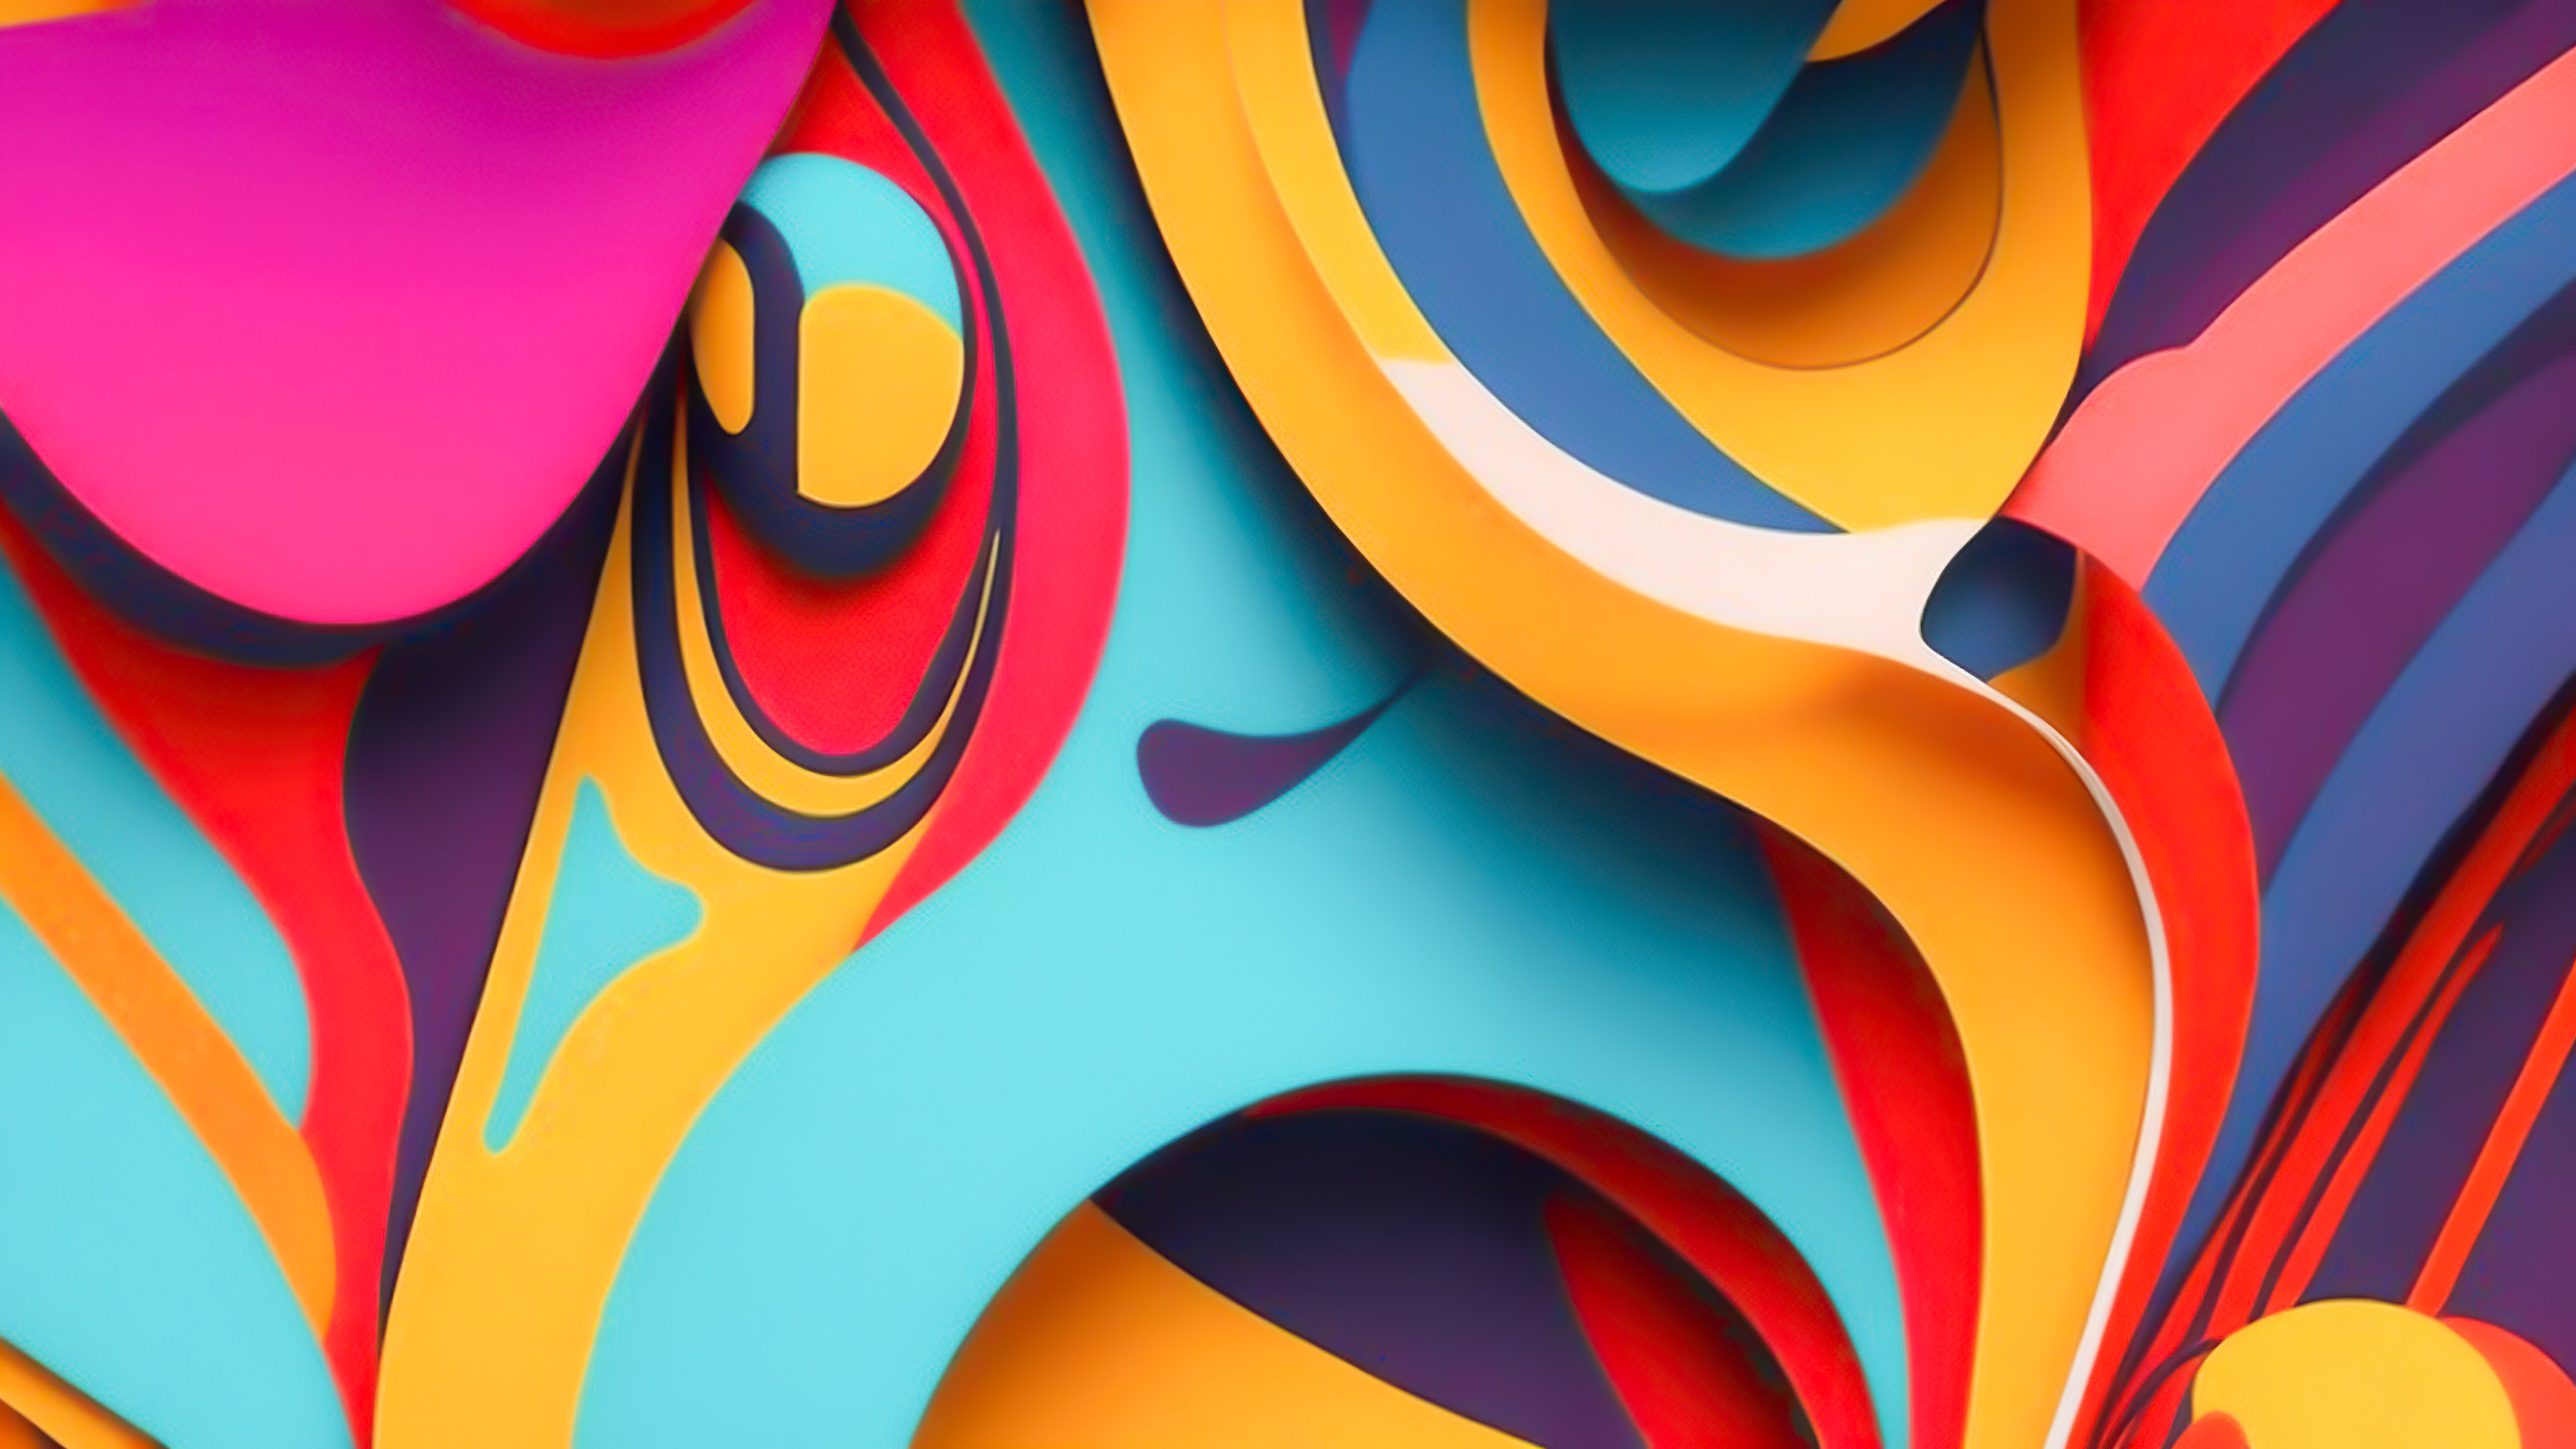 Elevate your desktop with a burst of color and energy with a dynamic abstract wallpaper.